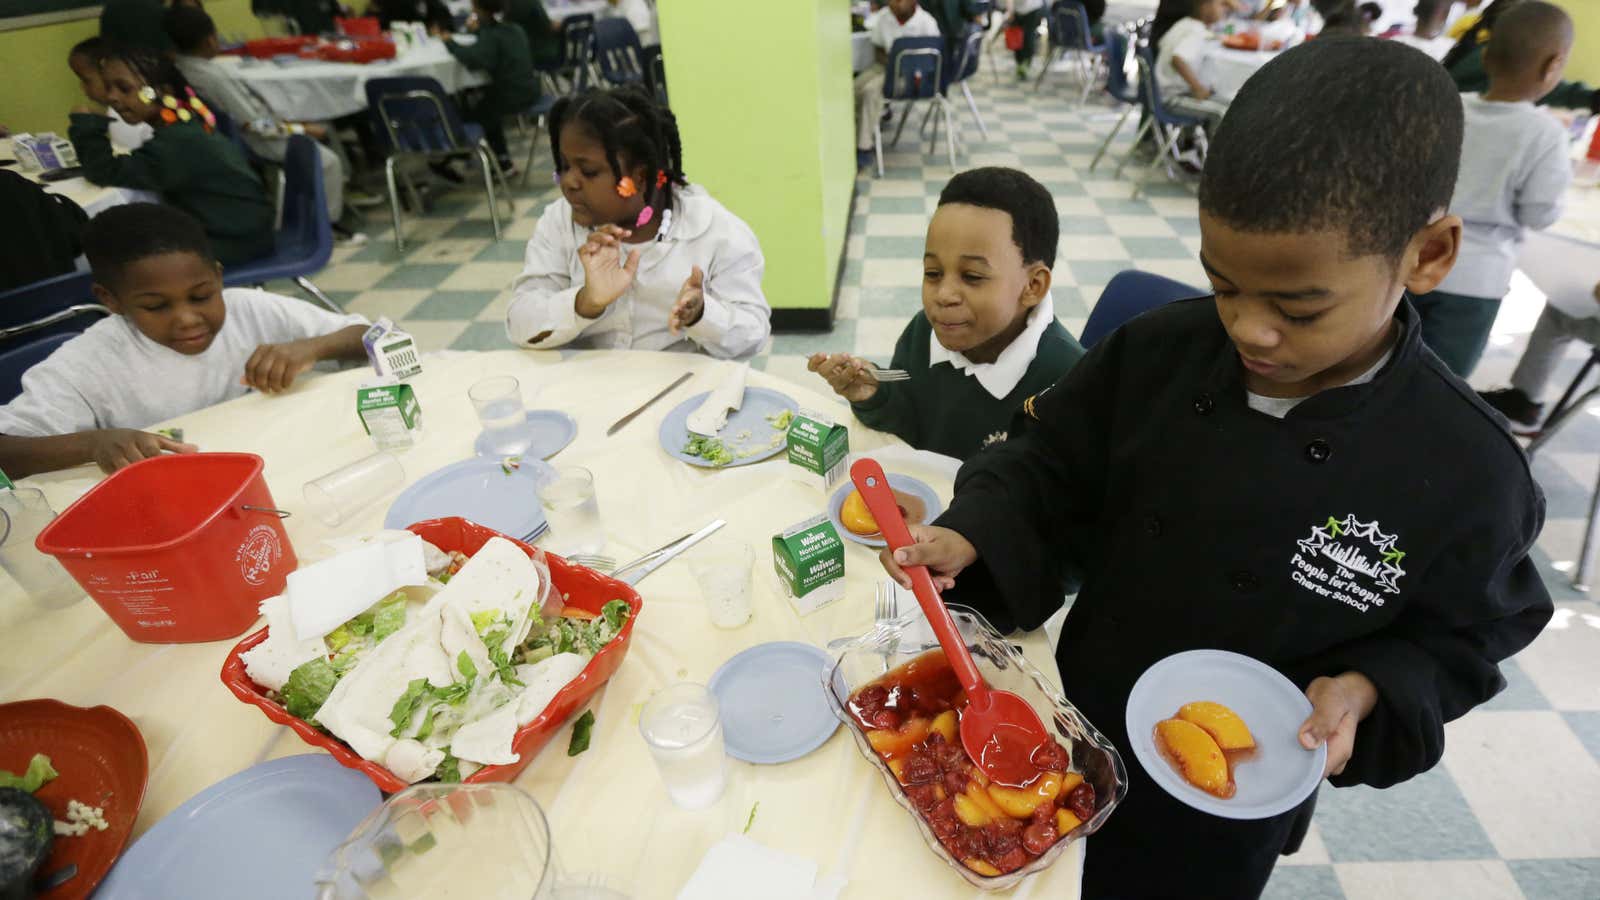 A student serves dessert to his fellow classmates at a charter school in Philadelphia, Pennsylvania where manners are reinforced.